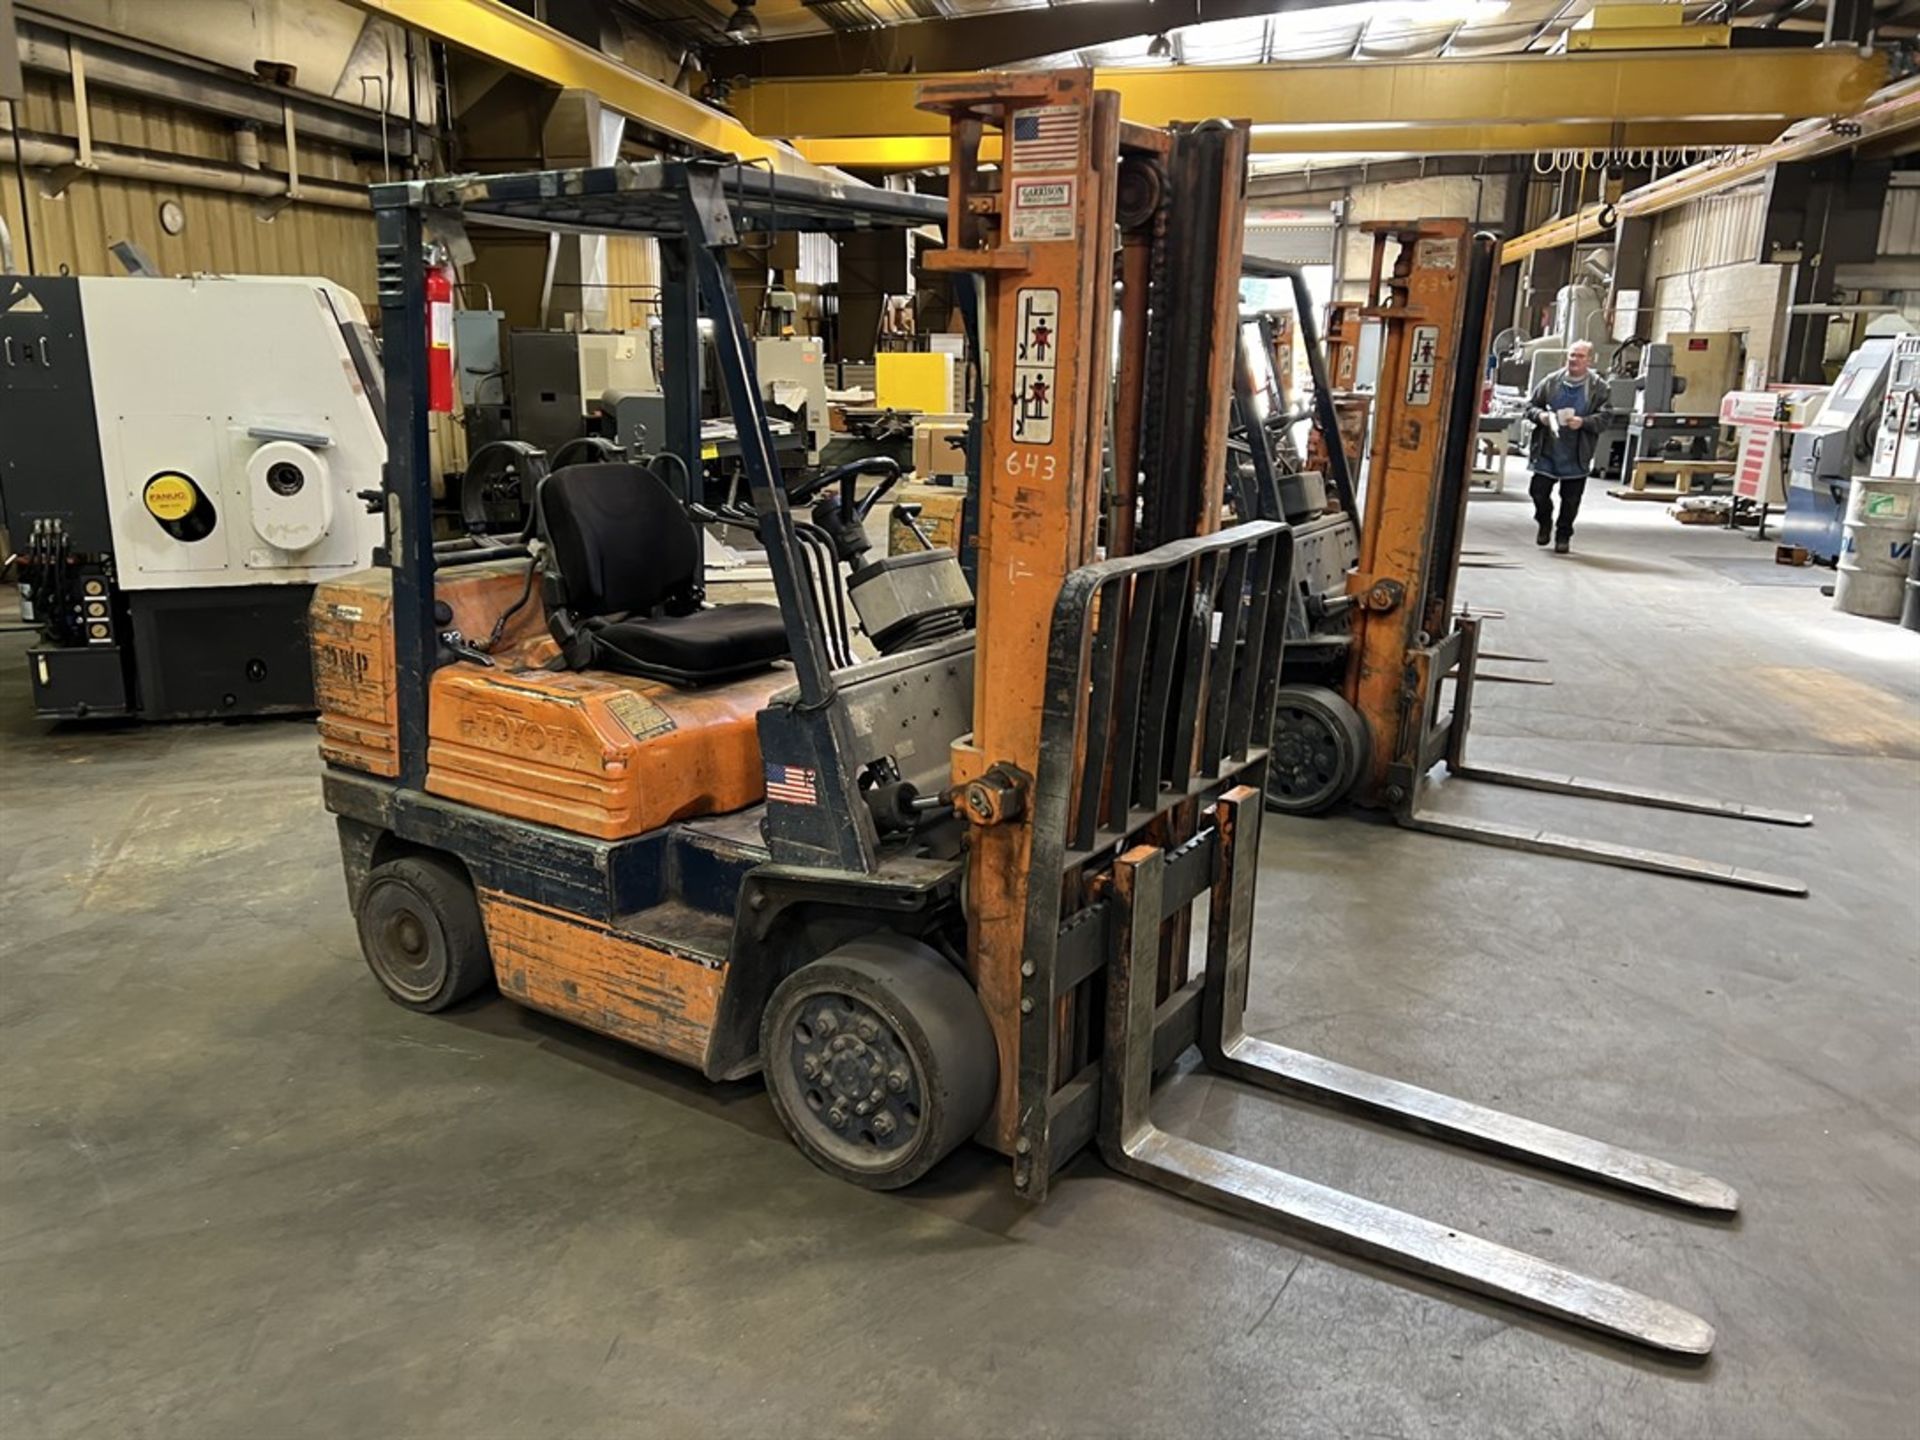 TOYOTA 5FGC30 LP Forklift, s/n 5FGCU30-70315, 6000 Lb Capacity, 2-Stage Mast, OH Protection (Machine - Image 3 of 10